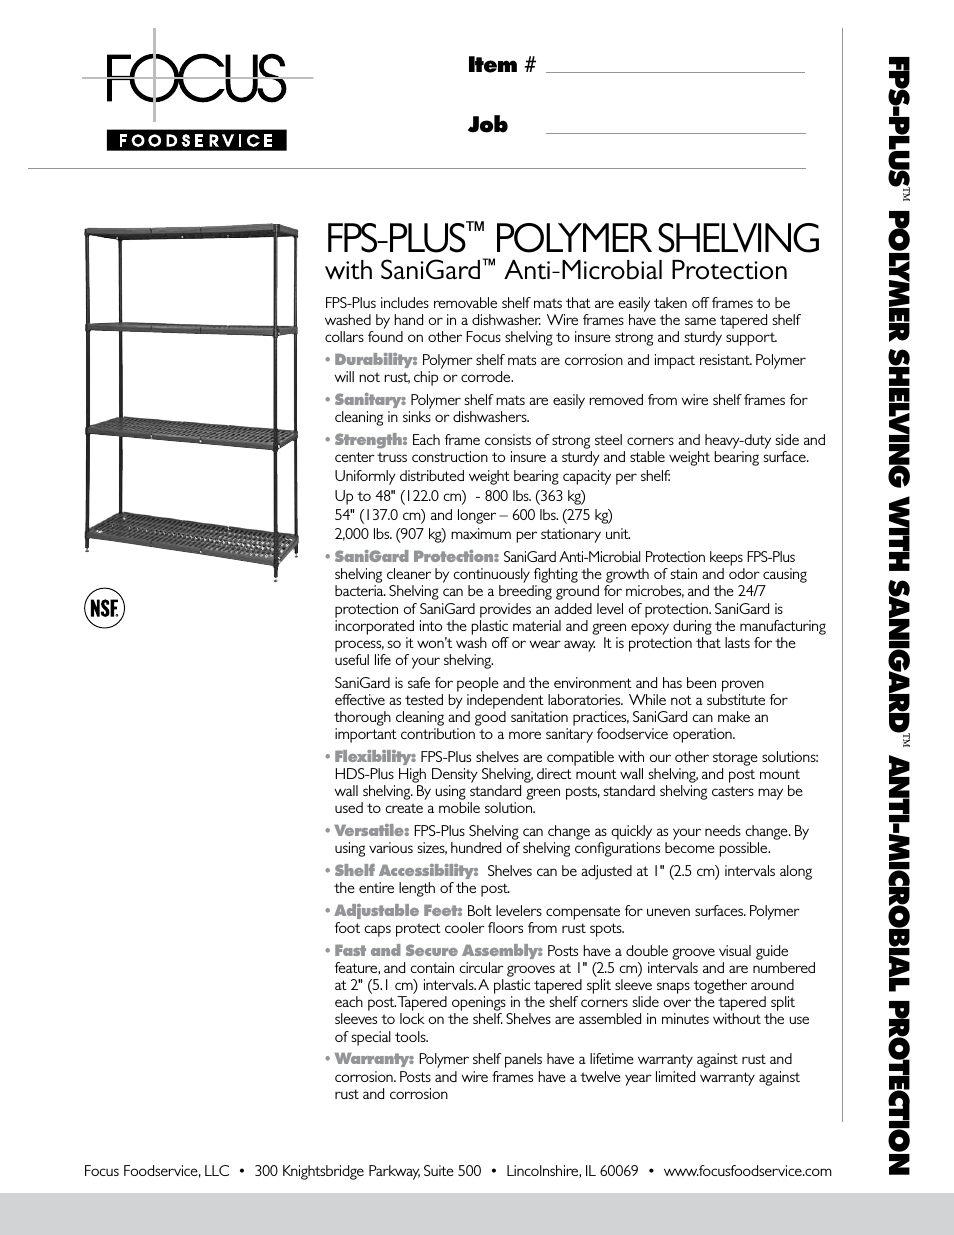 FPS-PluS Polymer Shelving - Specification Sheets